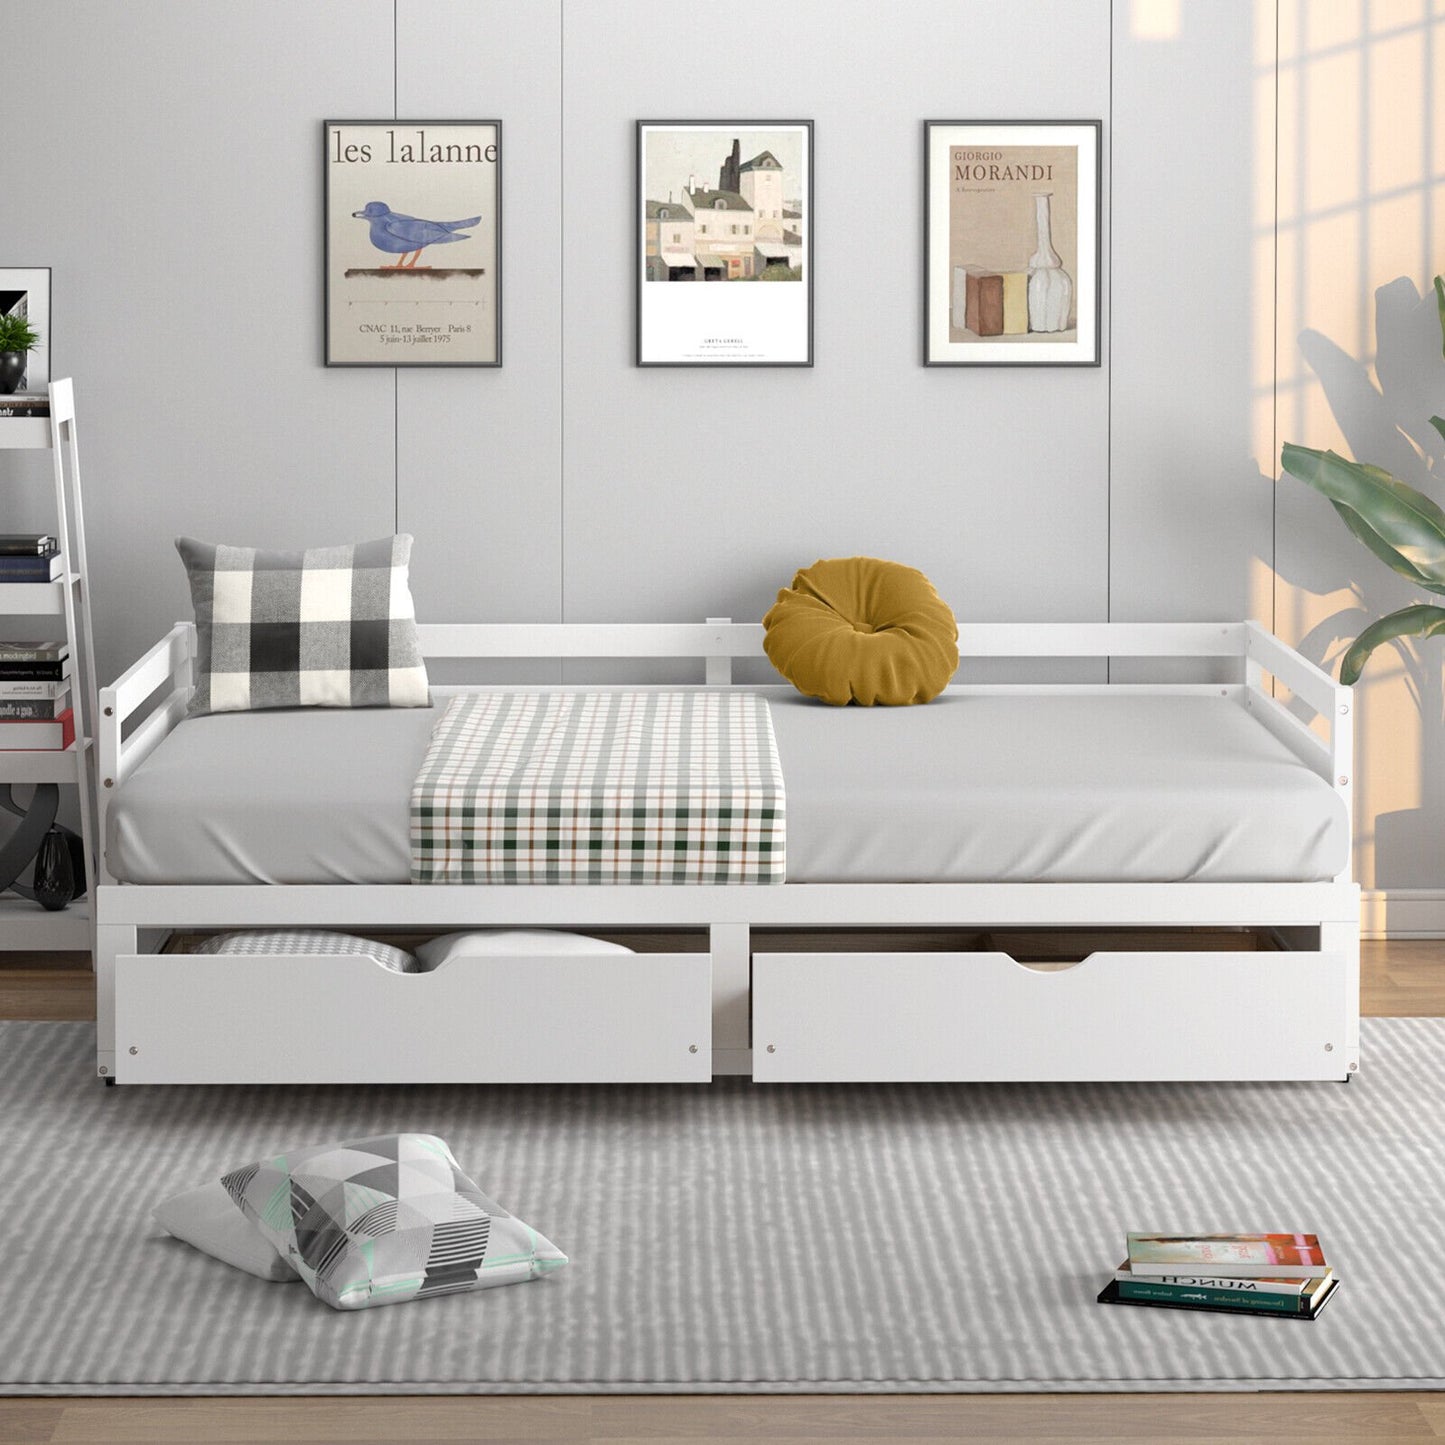 Extendable Twin to King Daybed with Trundle and 2 Storage Drawers, White